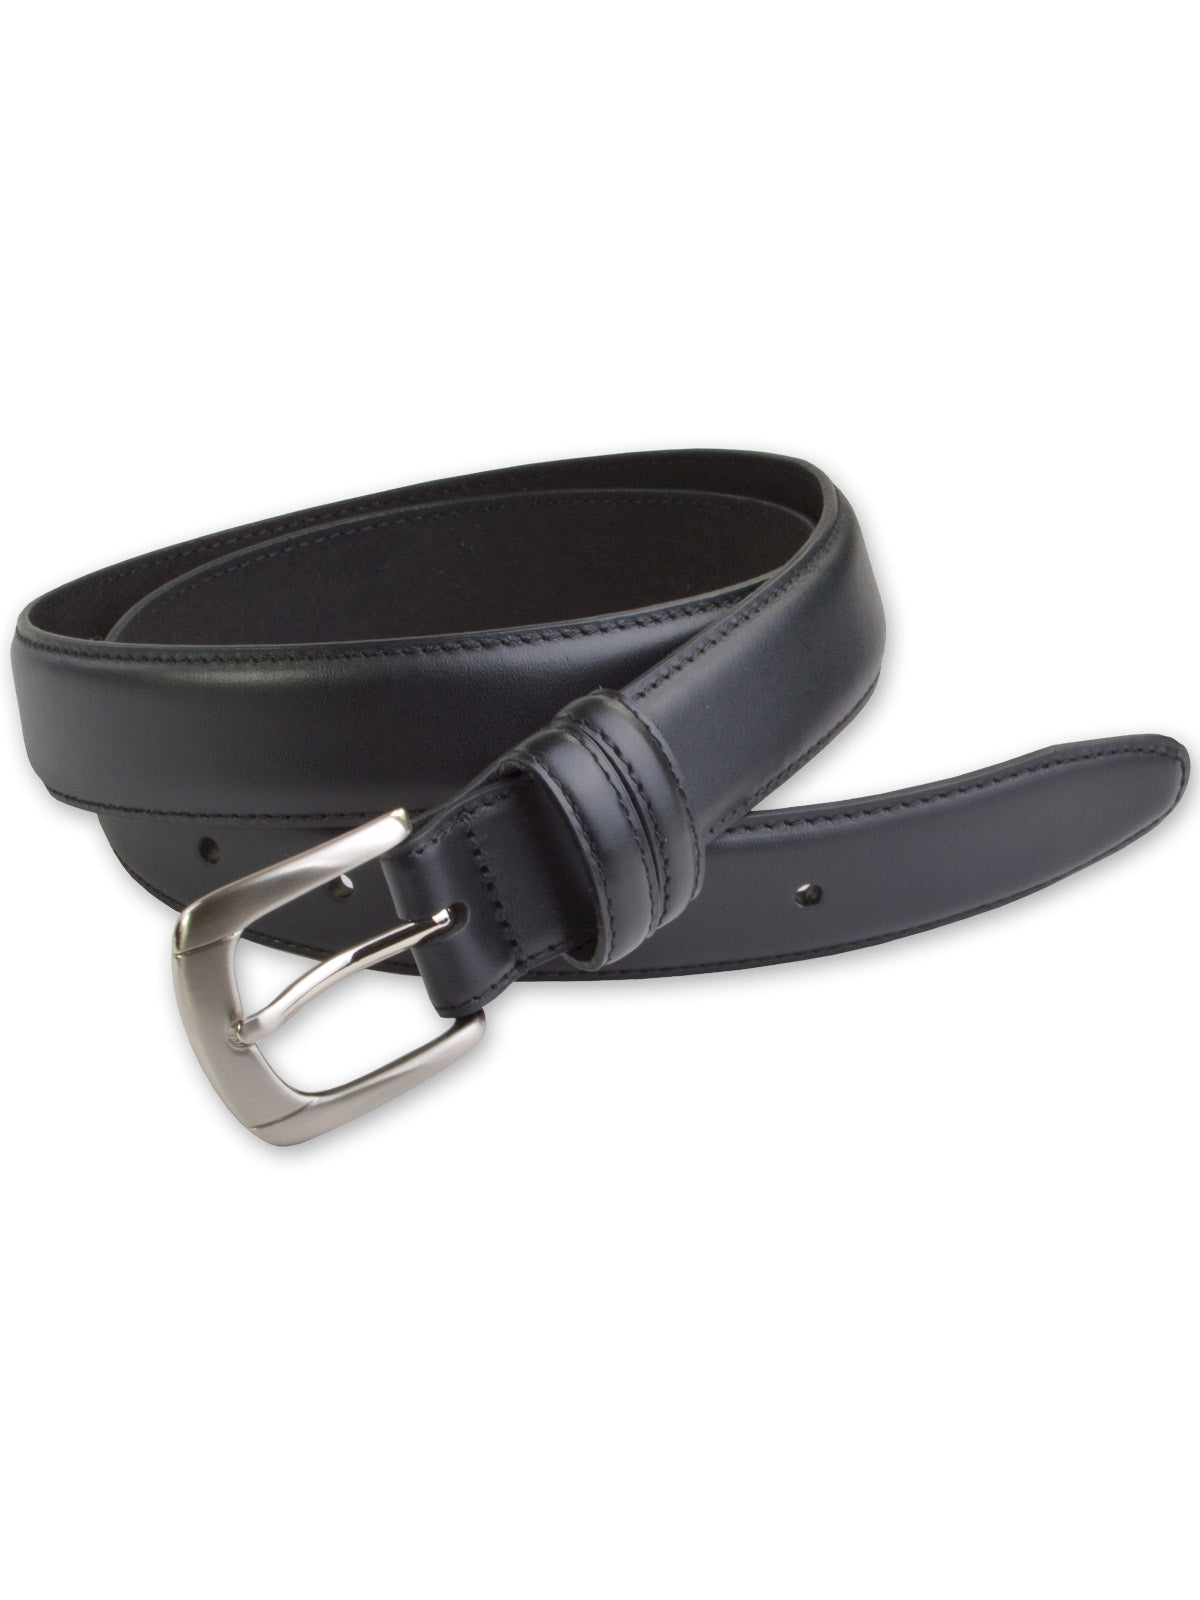 Marc Wolf Leather Dress Belts - Black with Silver Buckle 400SLV-C-BLK (56-70)